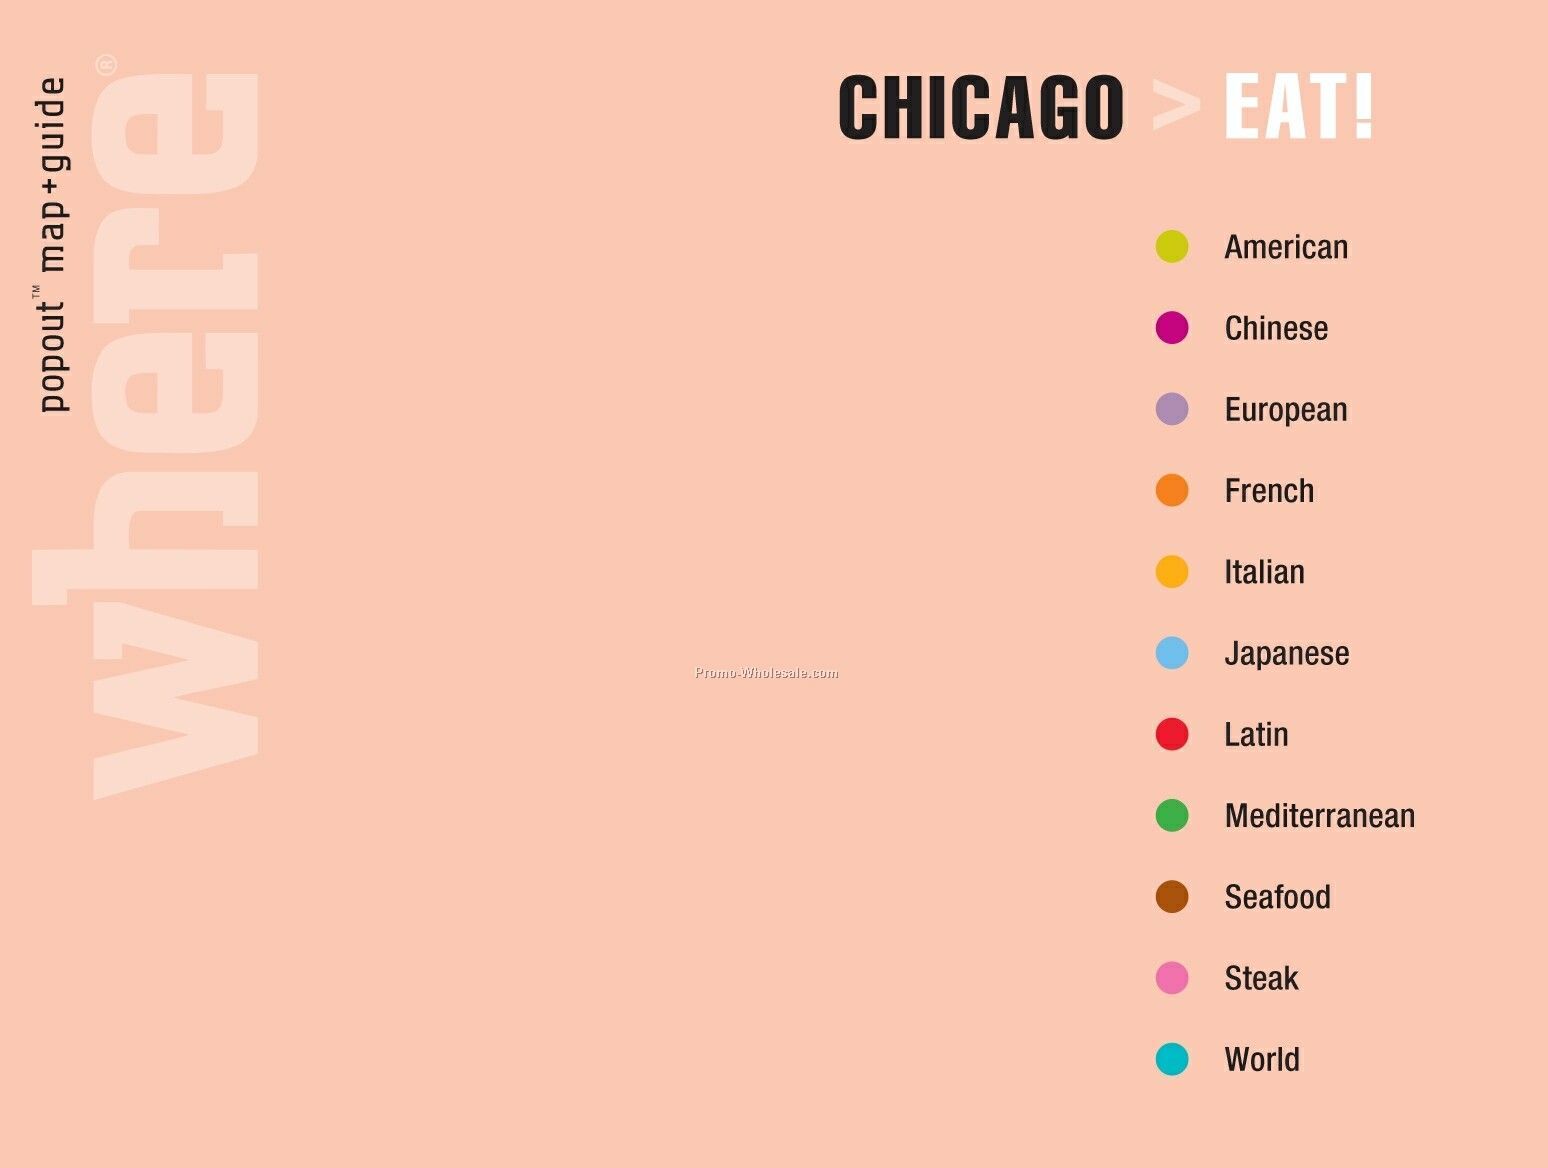 Travel Guides - Eat! Chicago - Featuring Popout Maps